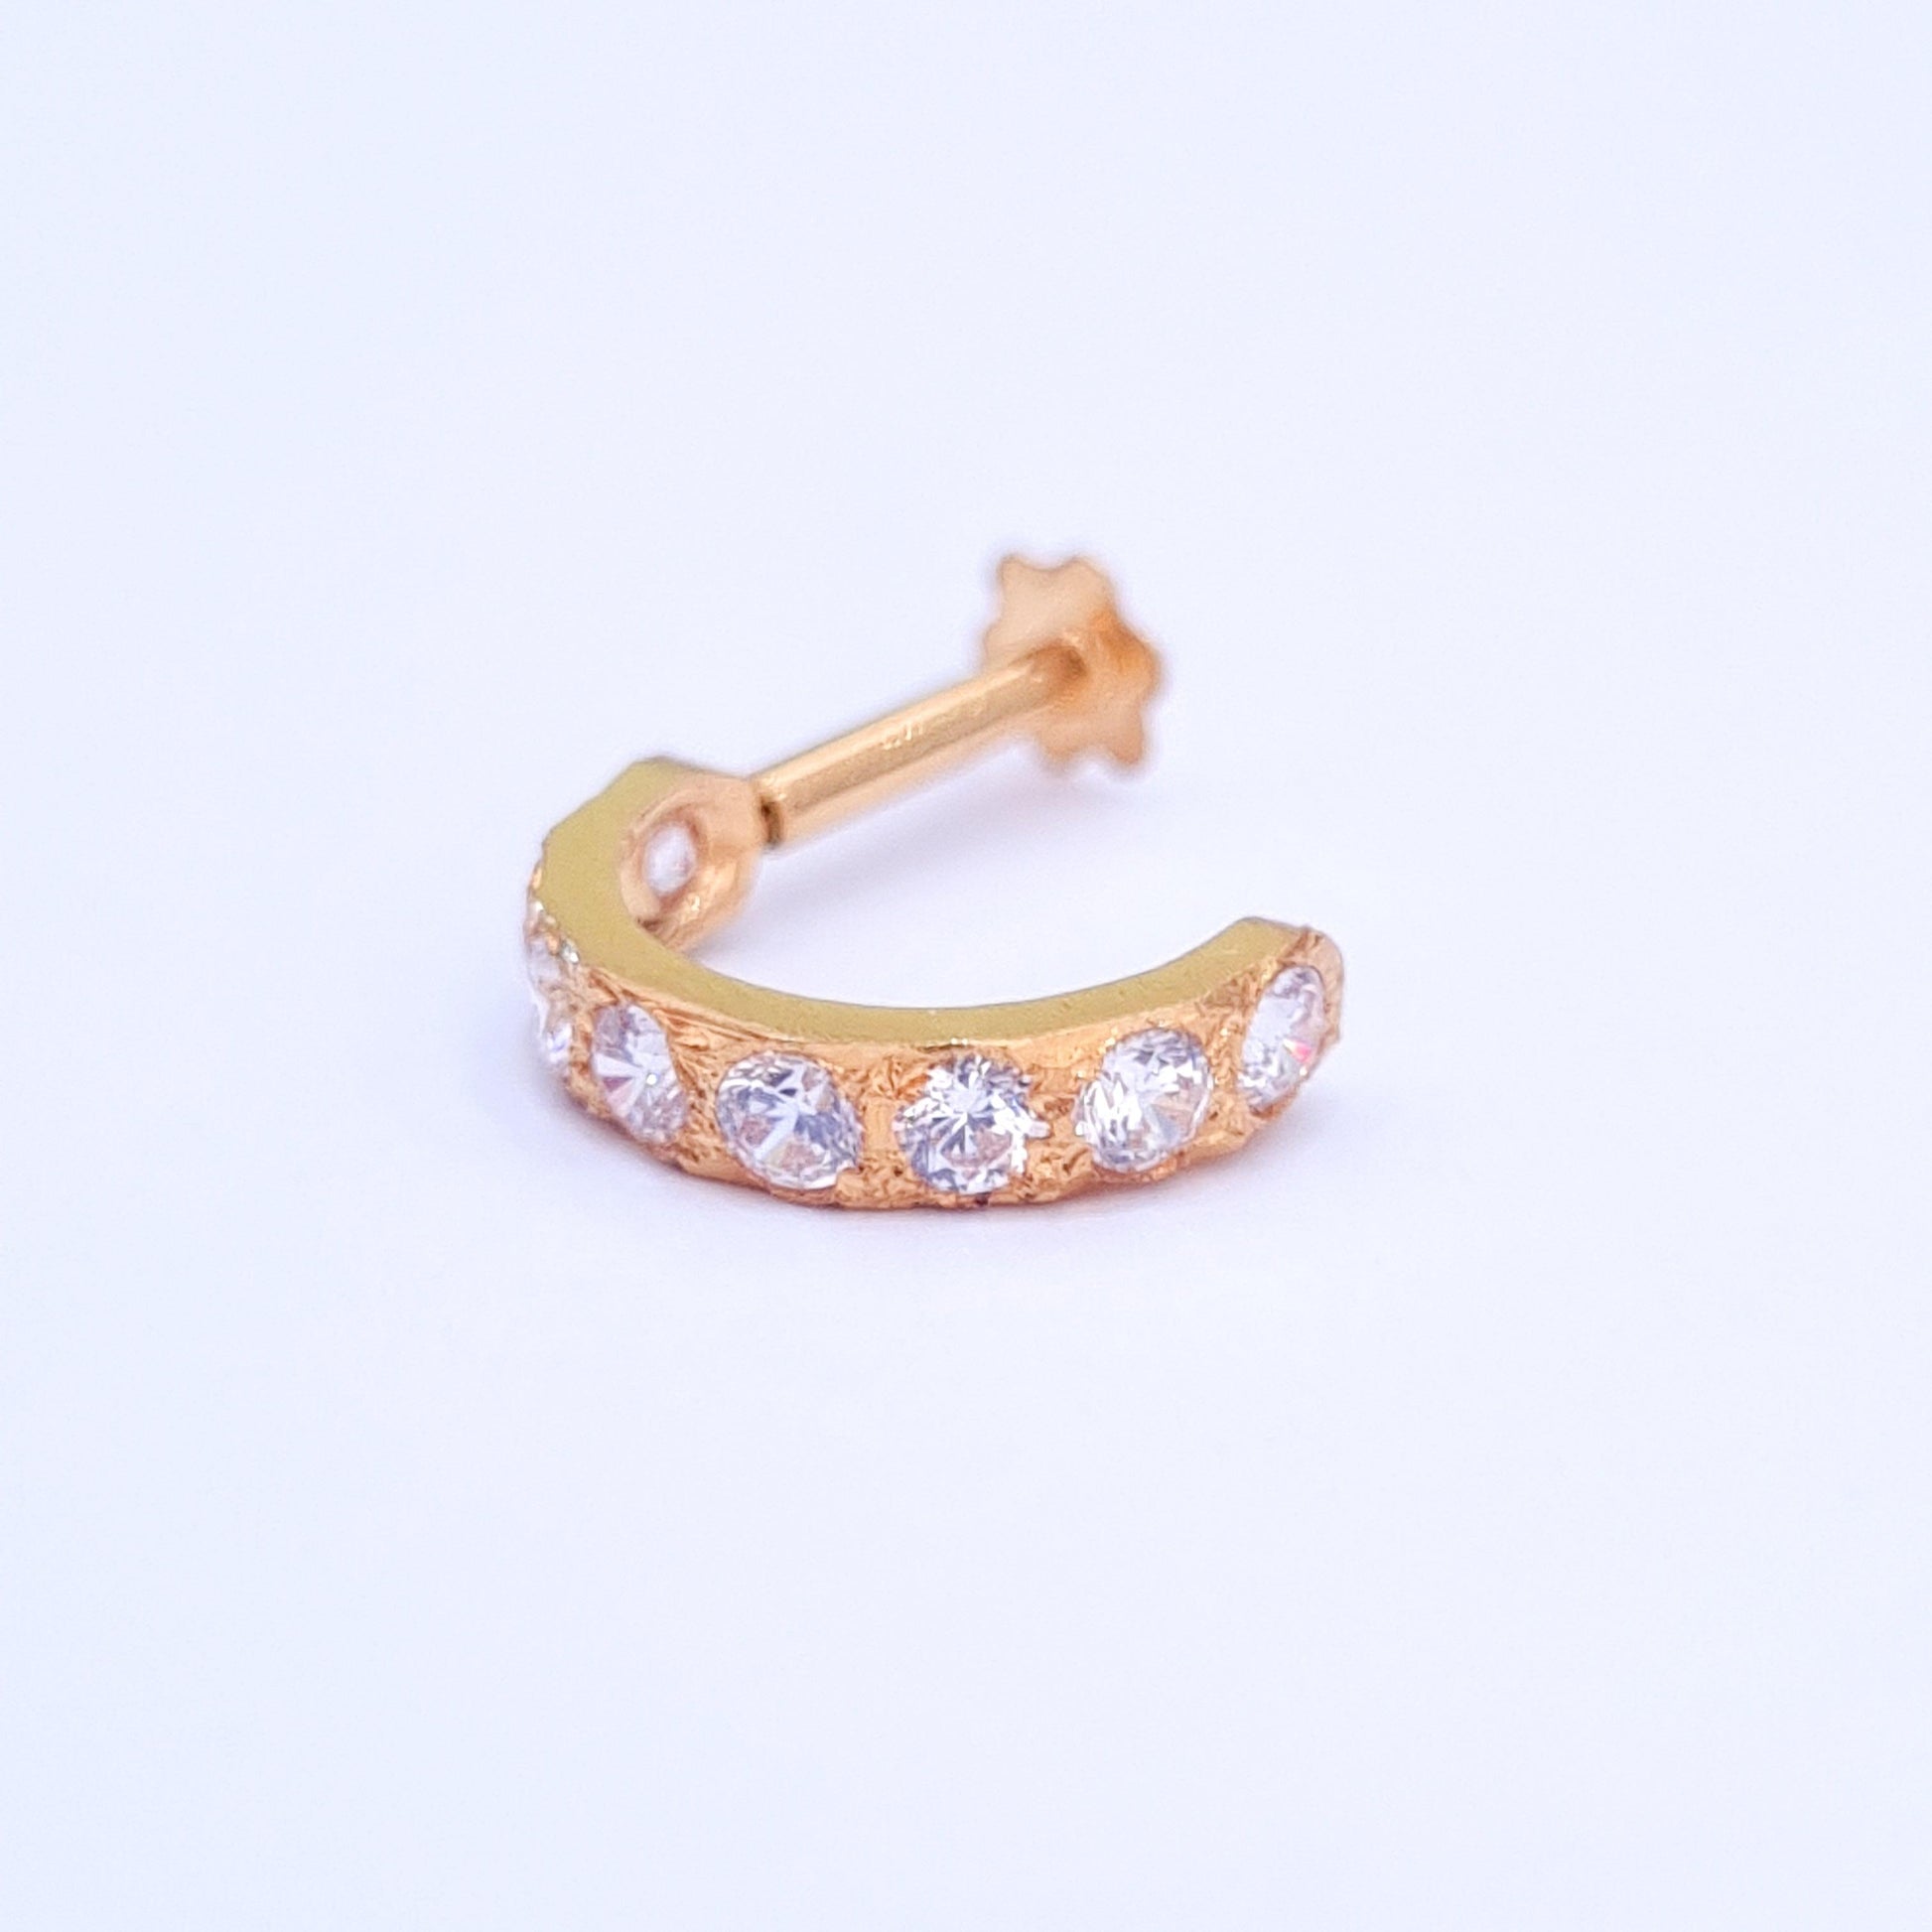 18ct Yellow Gold Faux Nose Ring with Screw Back Nose Stud with 8 Cubic Zirconias NS-2420 - Minar Jewellers